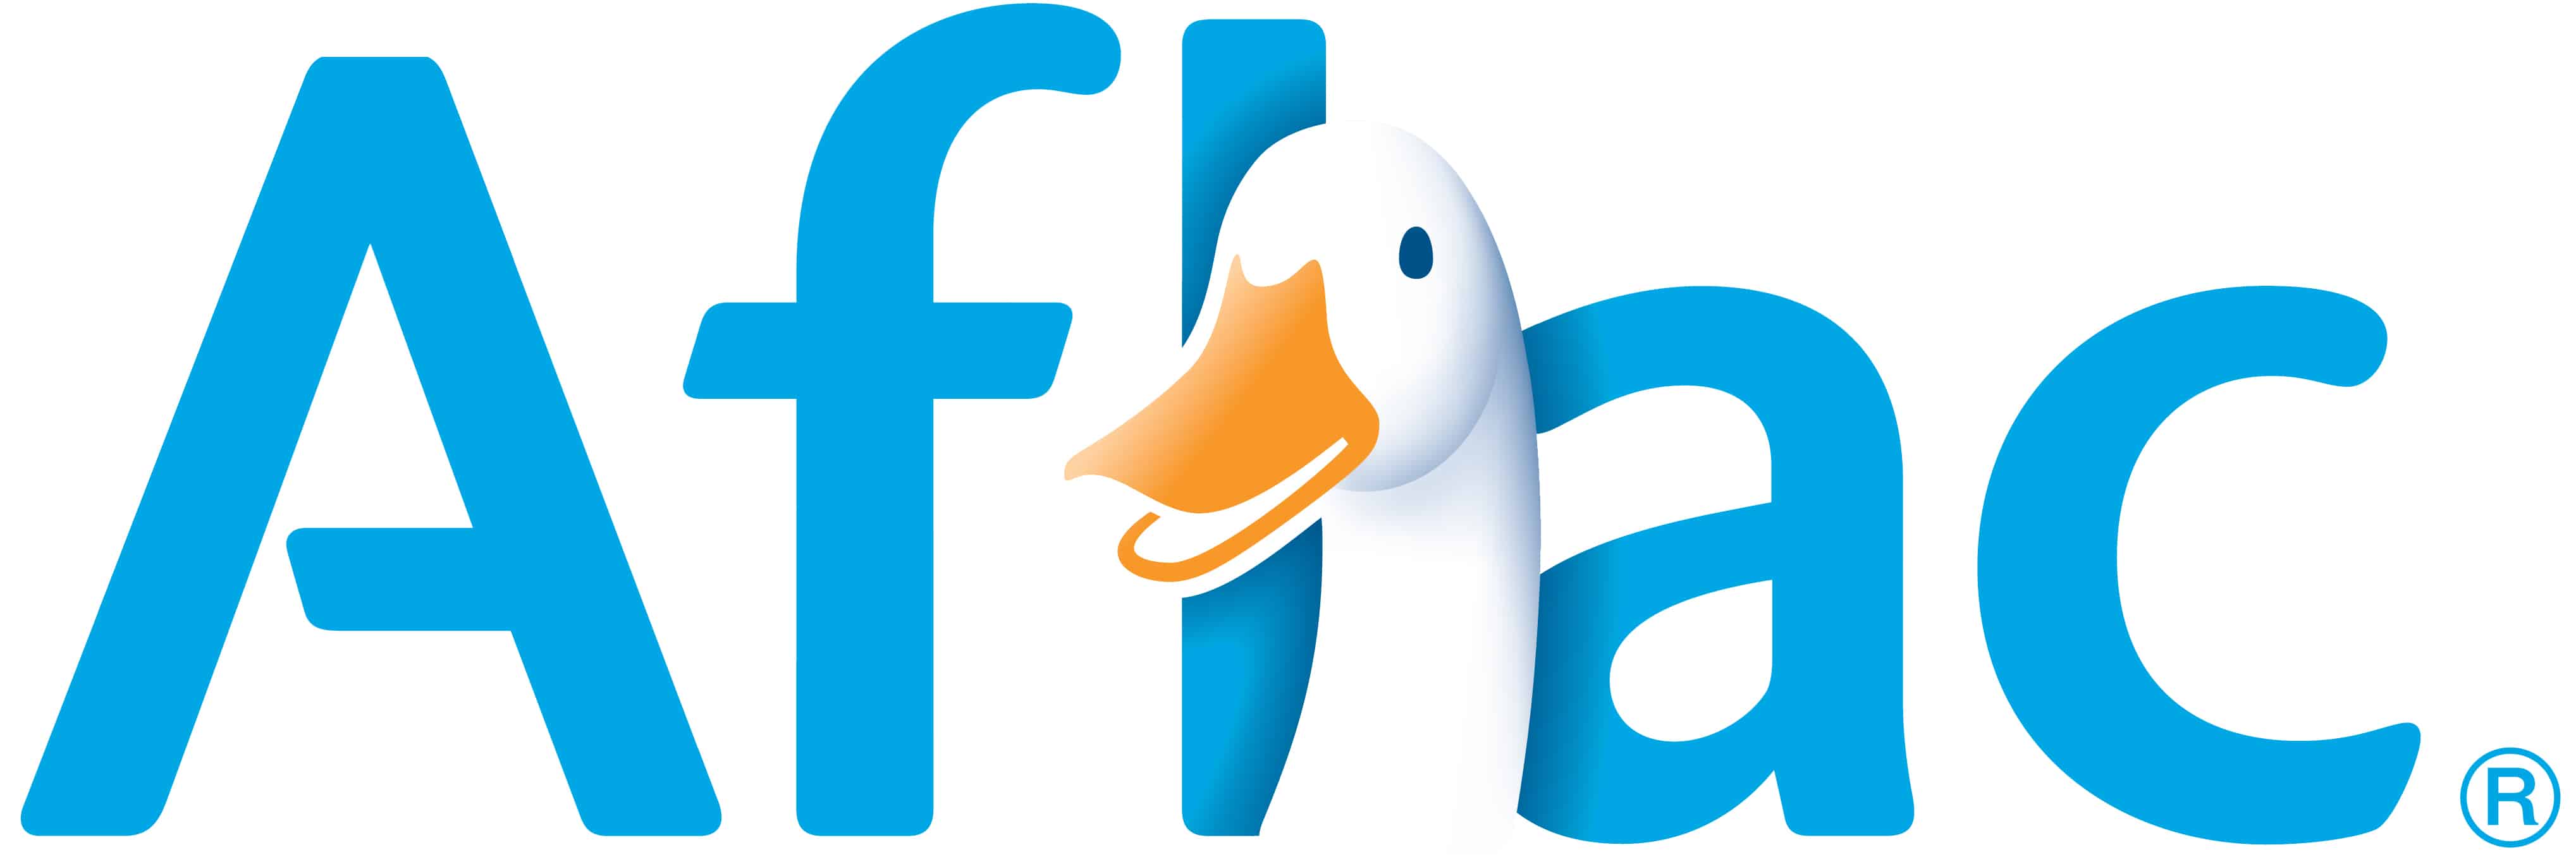 Hot Stock Commentary: Aflac (AFL)